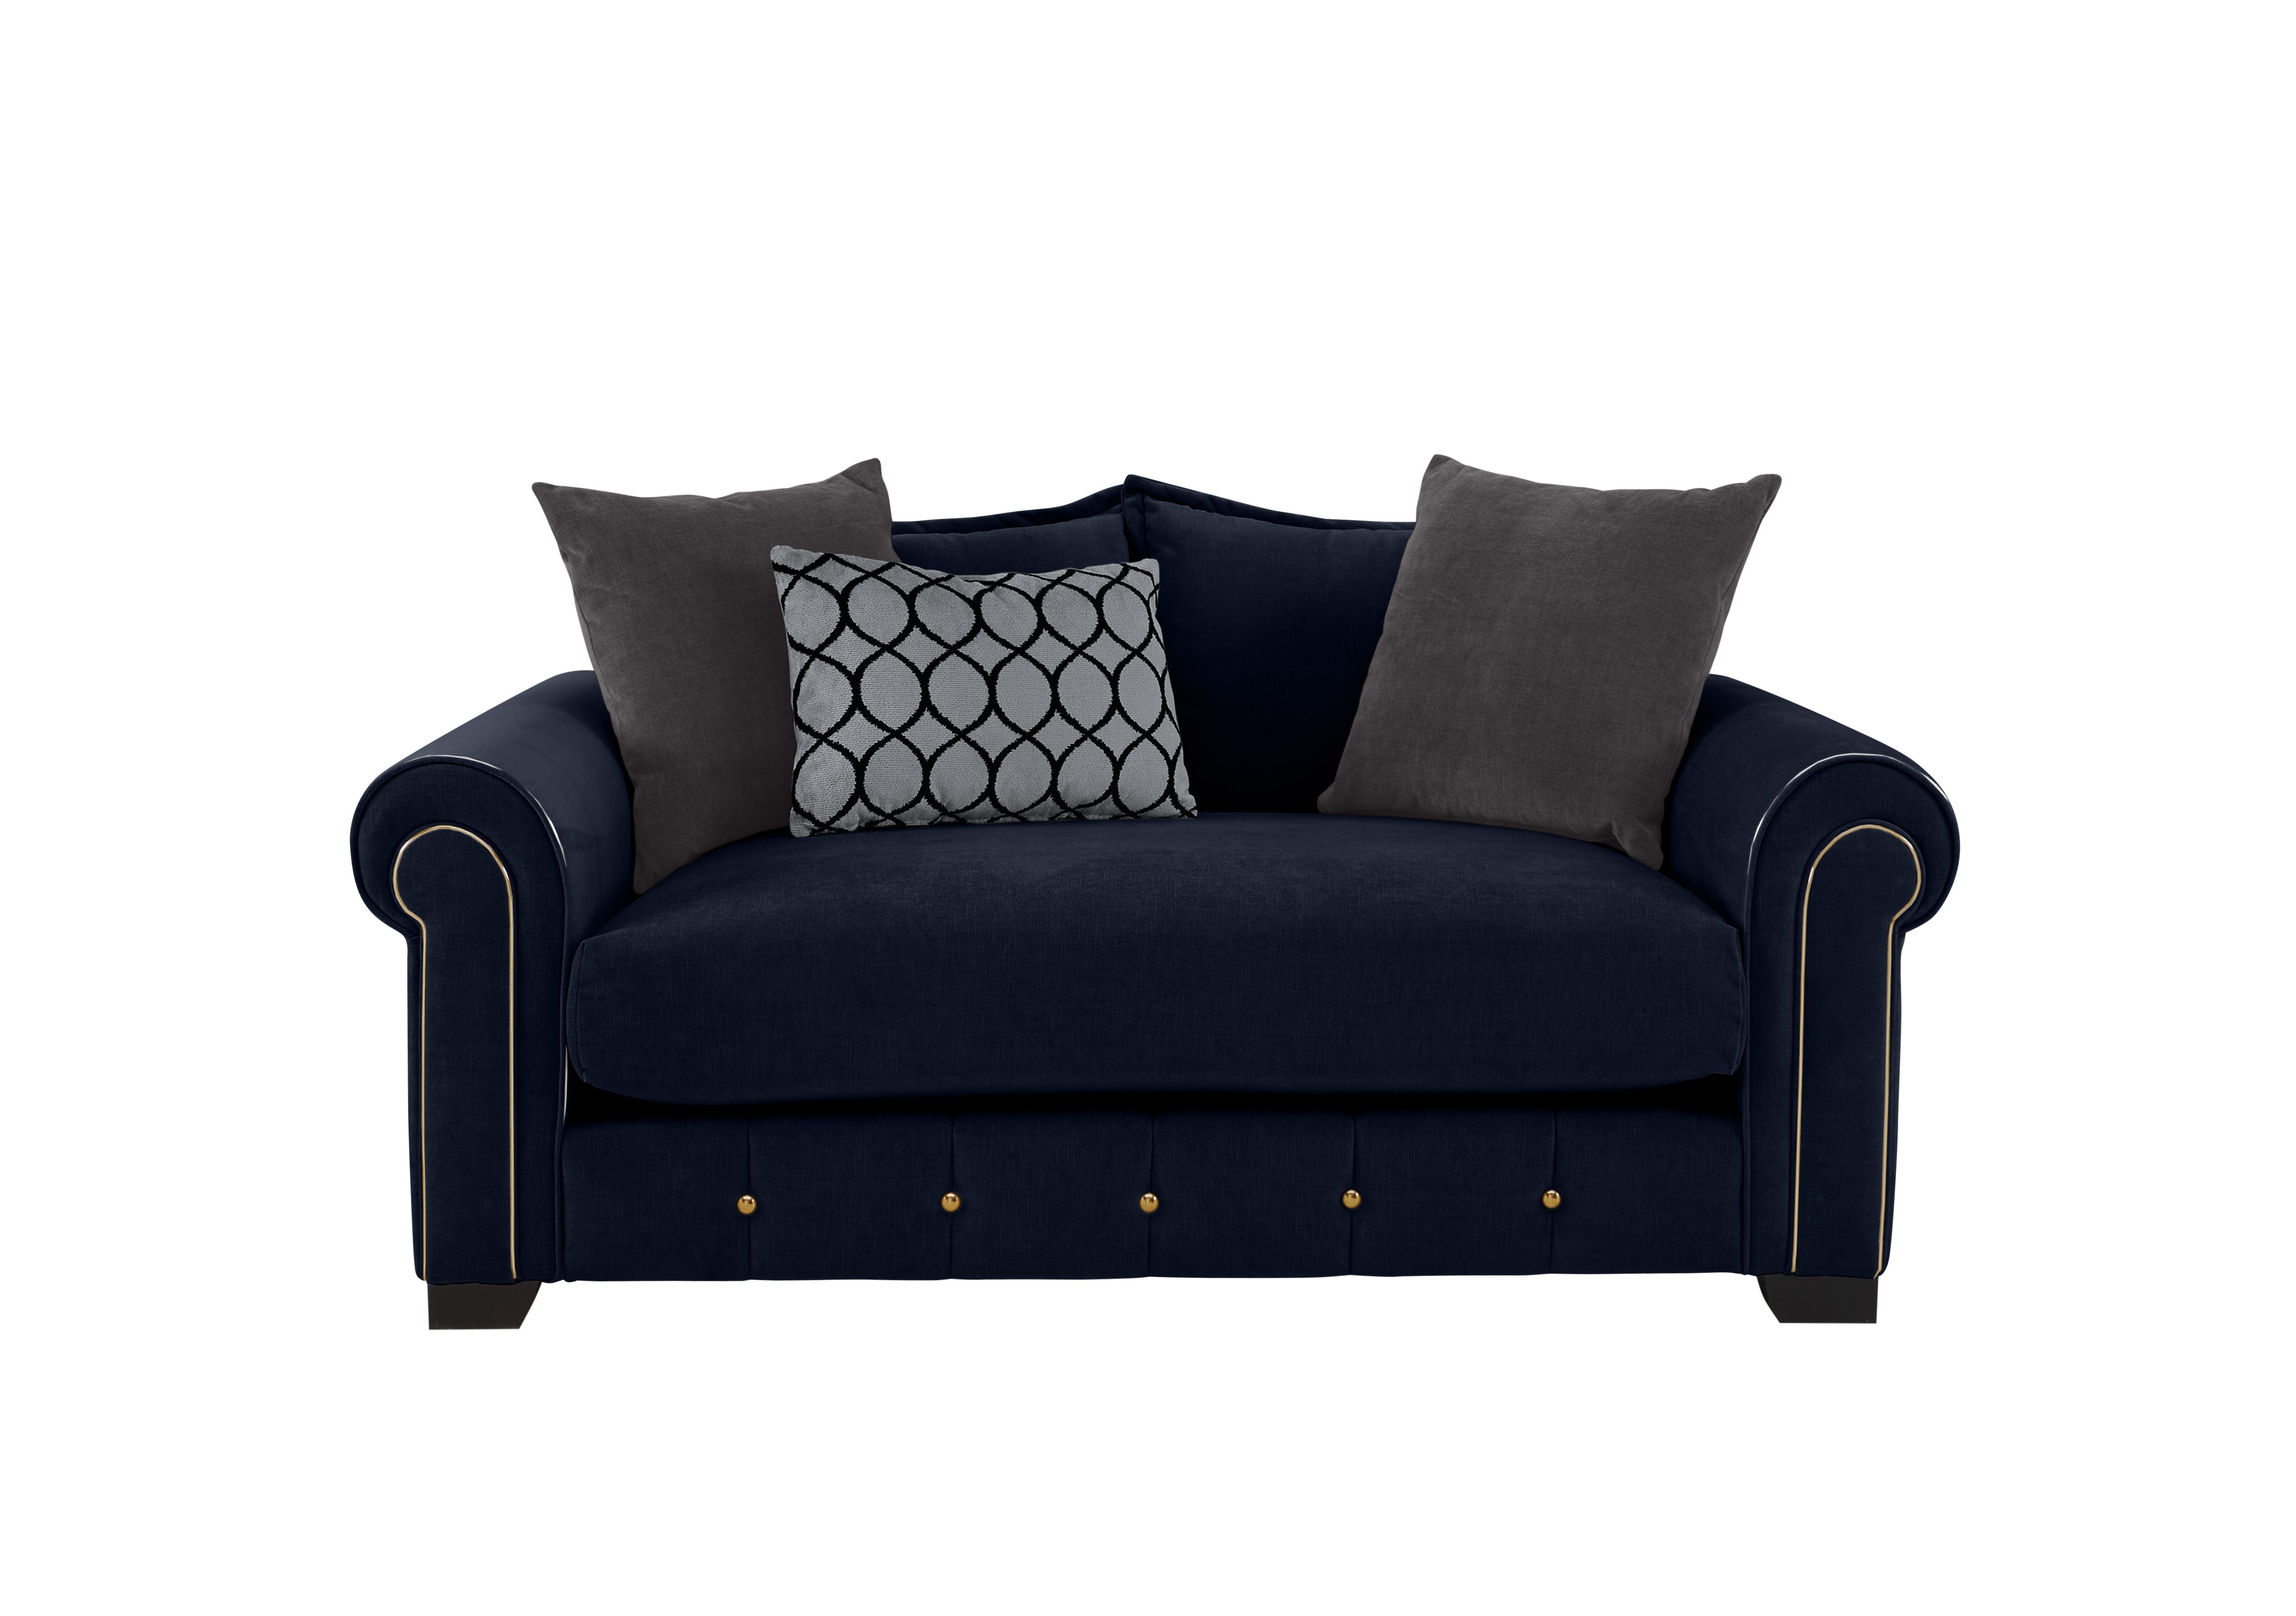 Sumptuous 2 Seater Fabric Sofa in Chamonix Navy Dk/Gold on Furniture Village